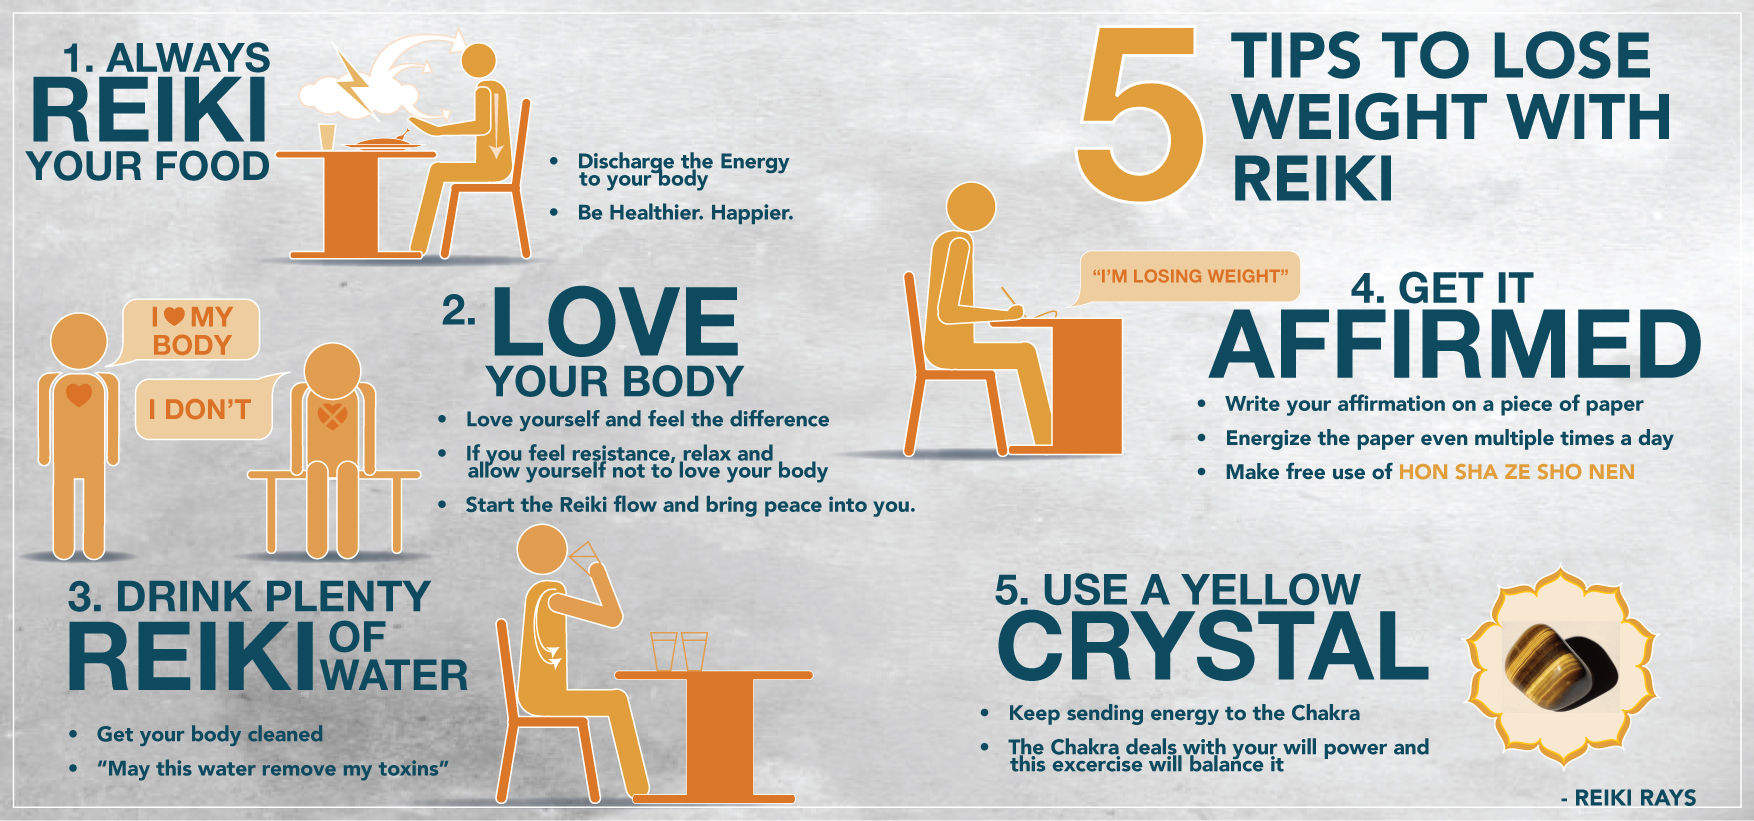 [Infographic] 5 Tips to Lose Weight with Reiki - Reiki Rays